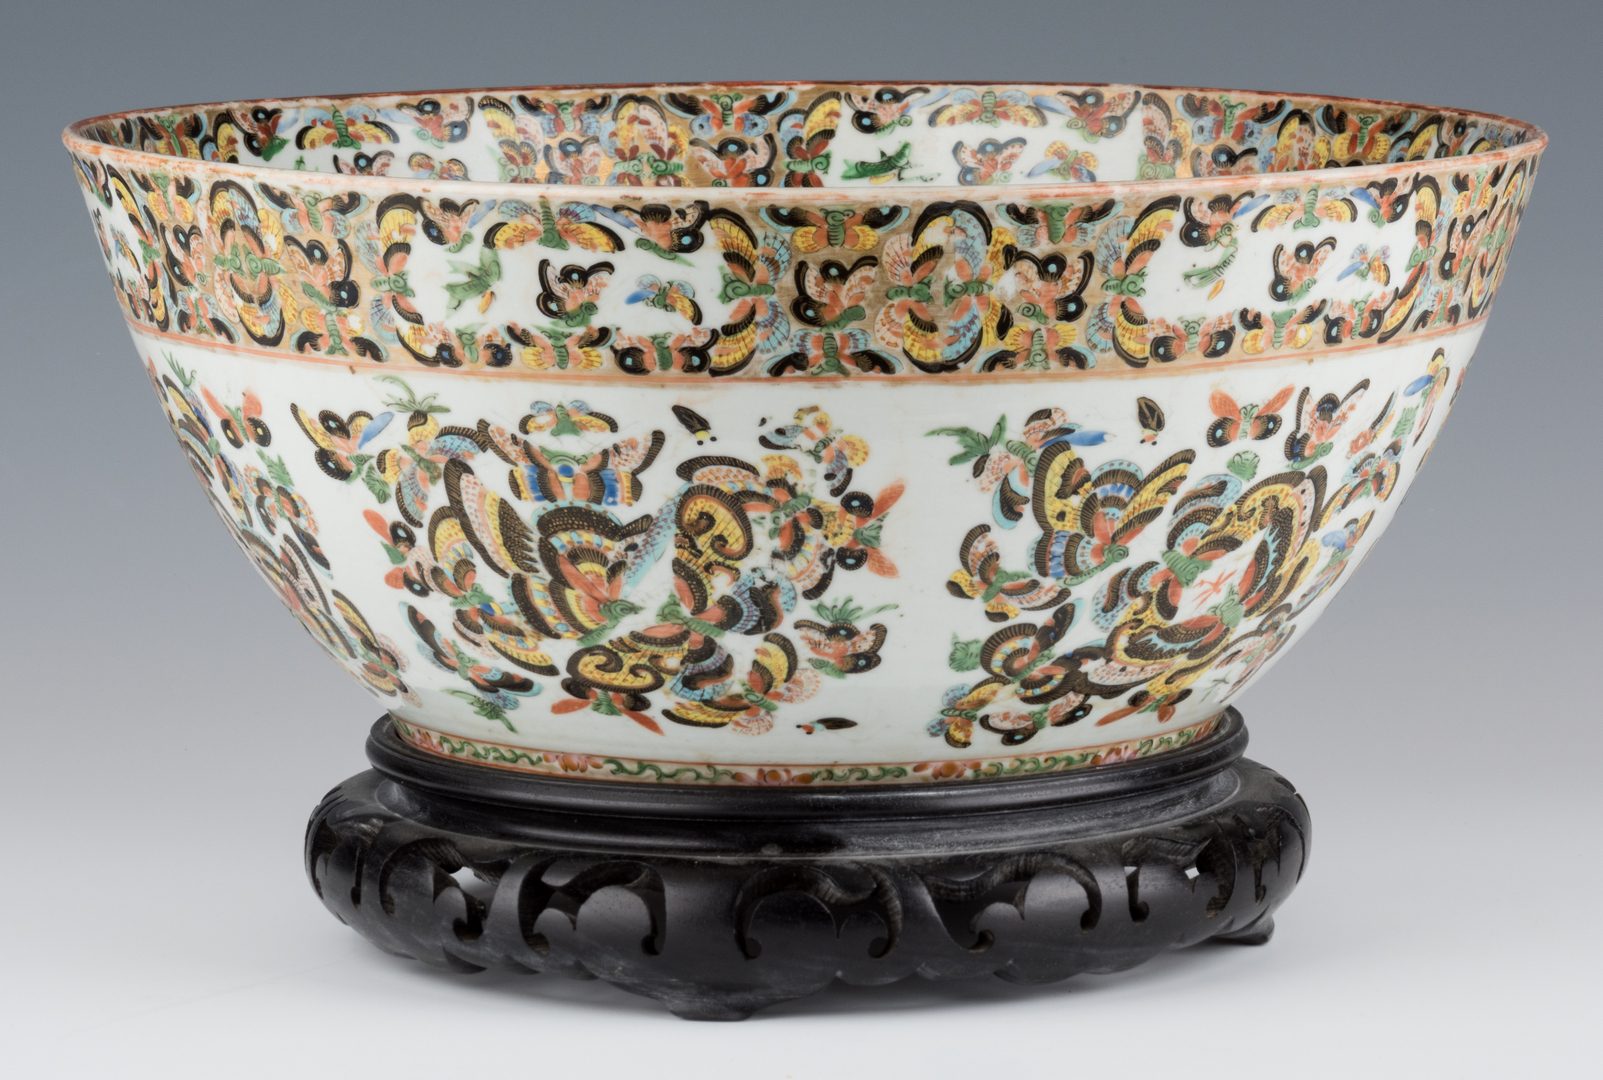 Lot 23: Chinese Export 1000 Butterflies Punch Bowl